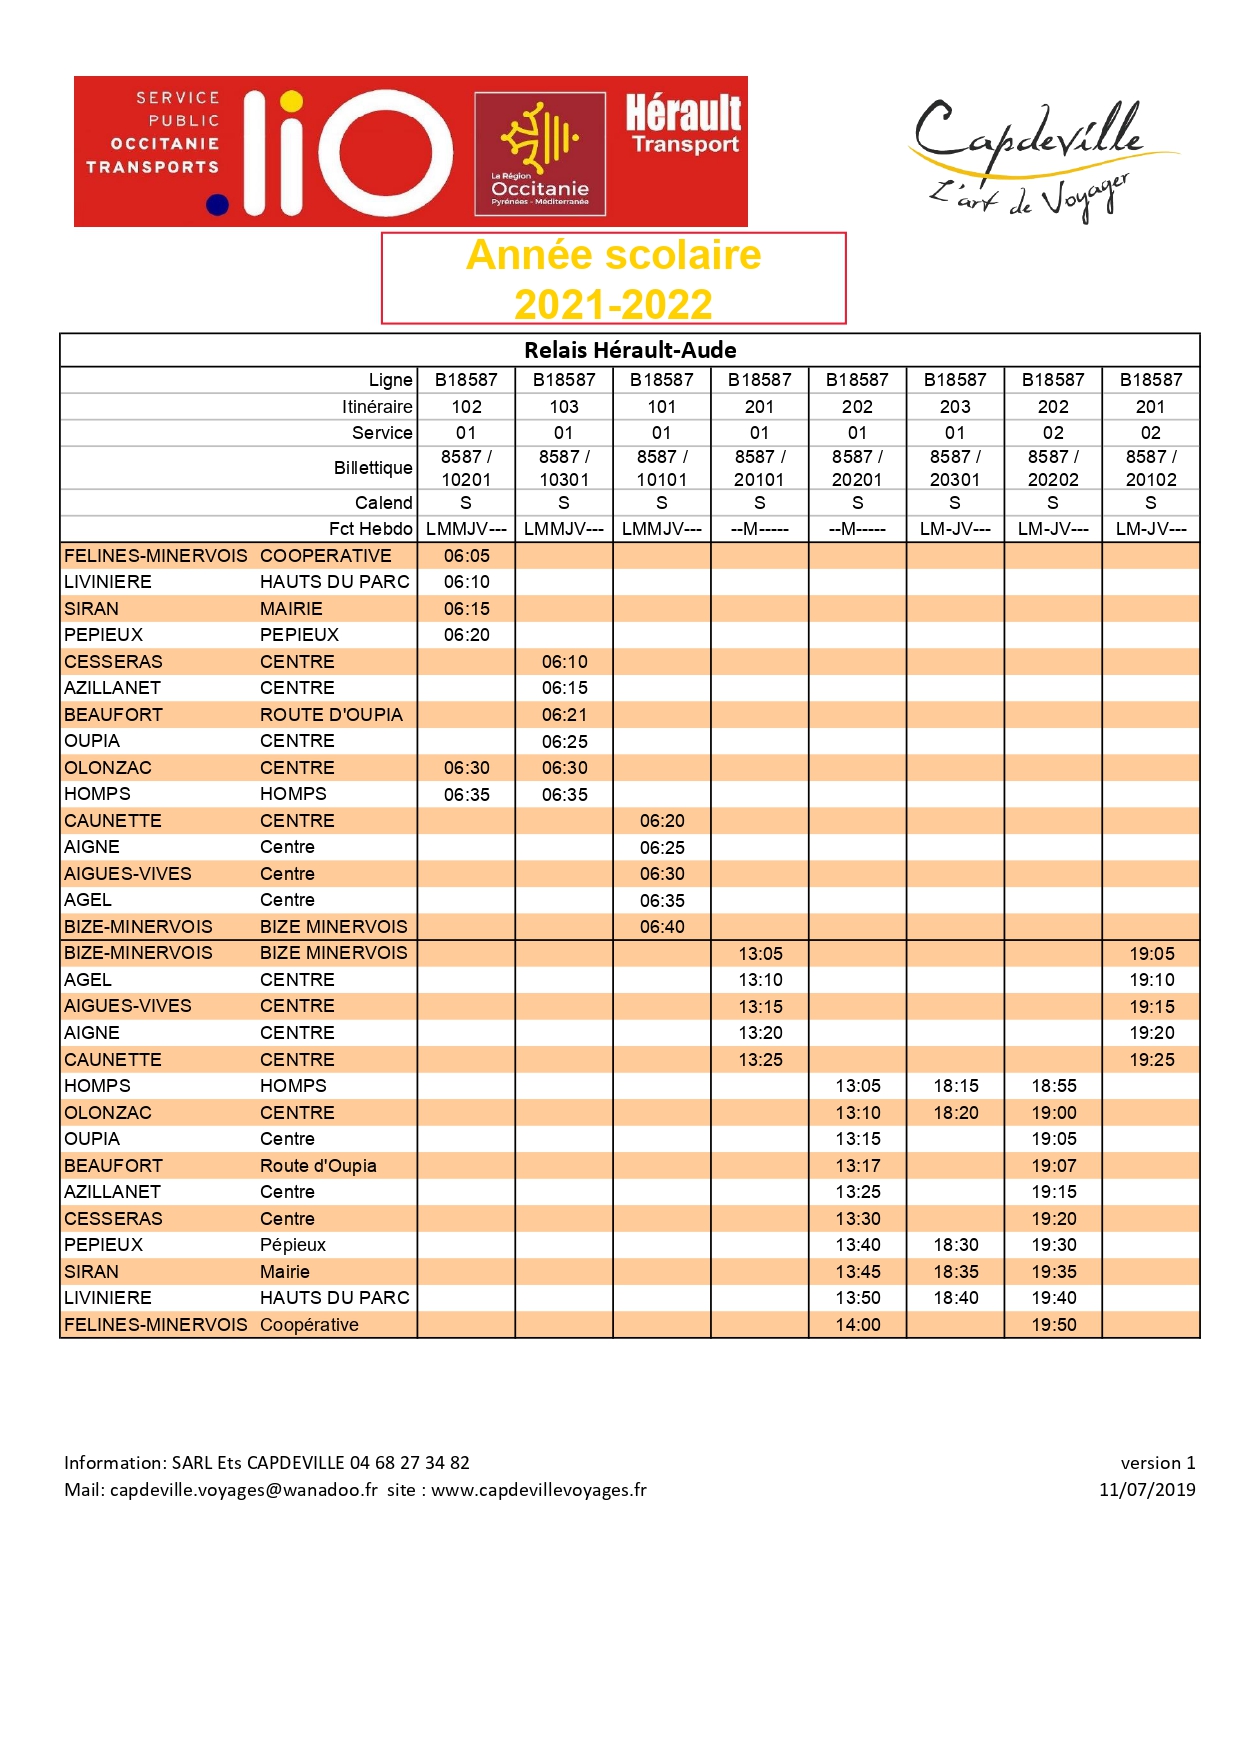 bus scolaire Horaires relais herault Aude -bize - Narbonne- -_pages-to-jpg-0001.jpg